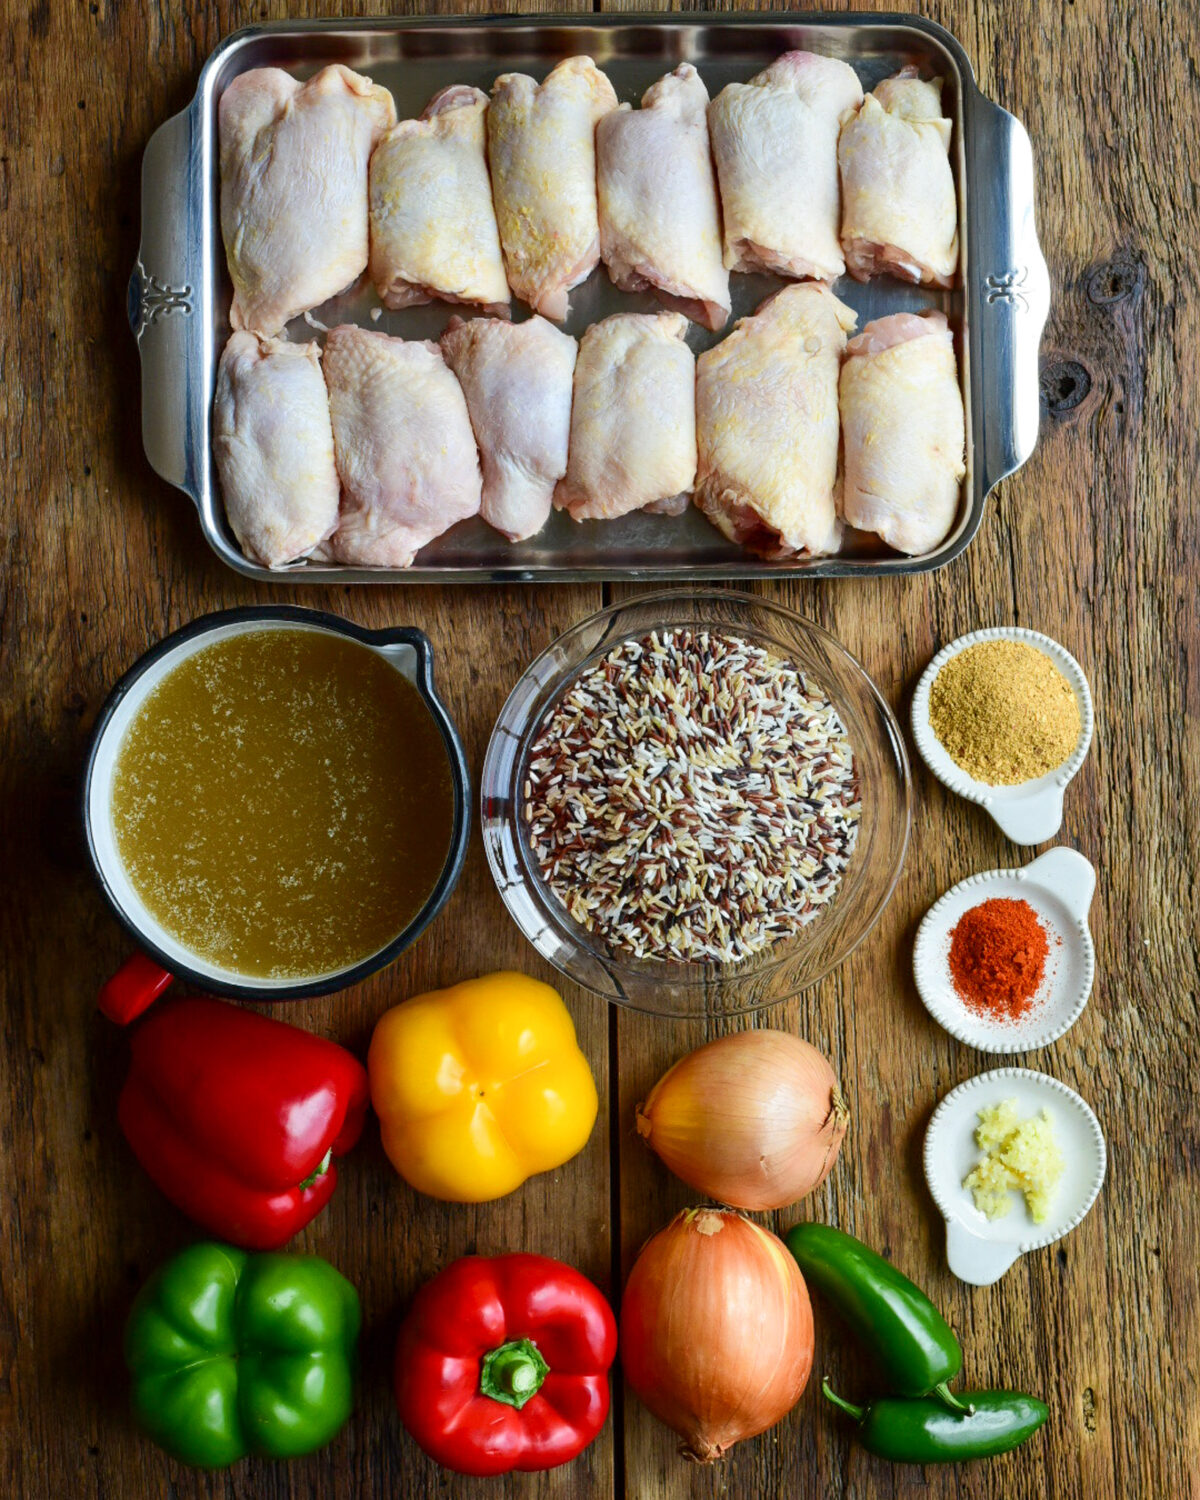 Ingredients for a peri peri chicken and spicy rice recipe.